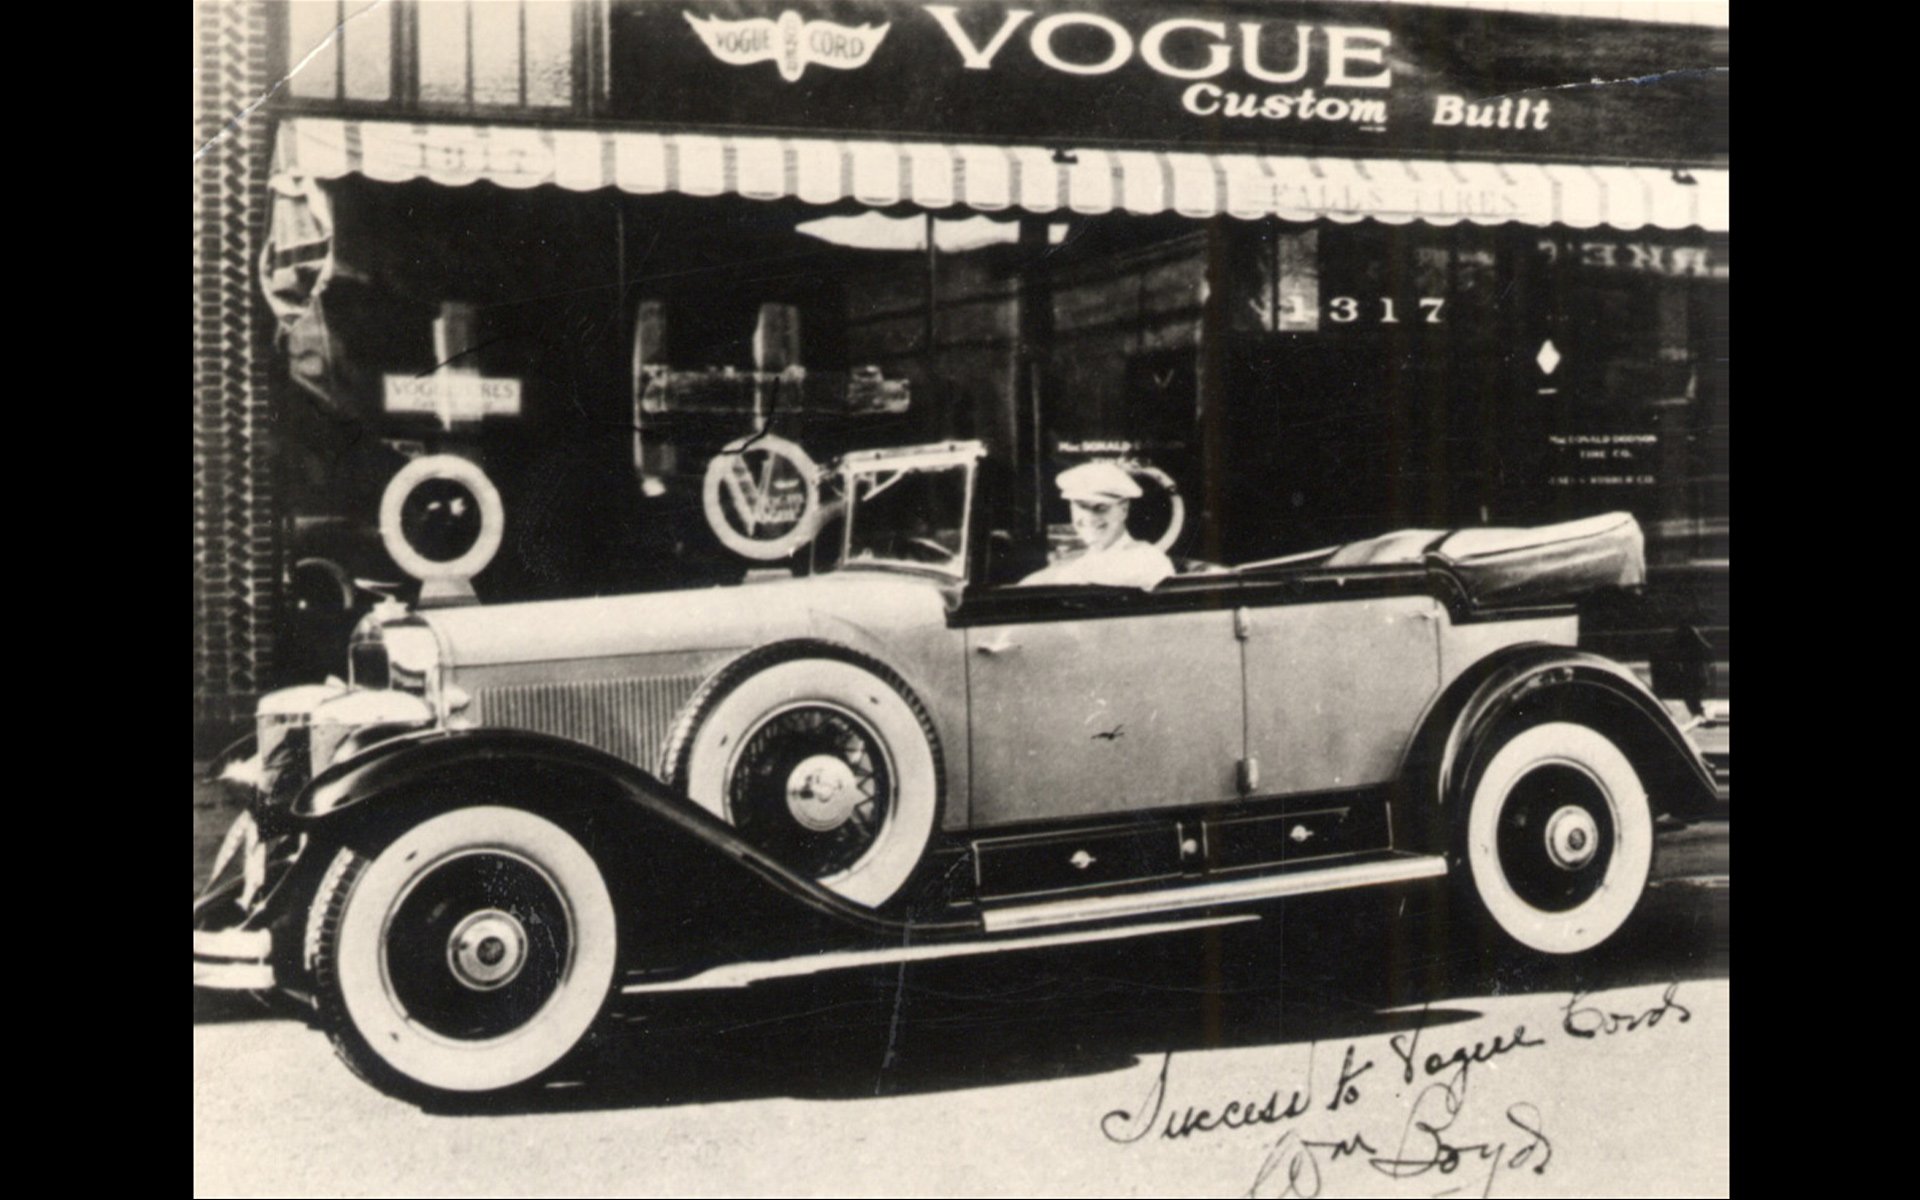 Actor William Boyd with Vogue Custom Built Tyres on his car.